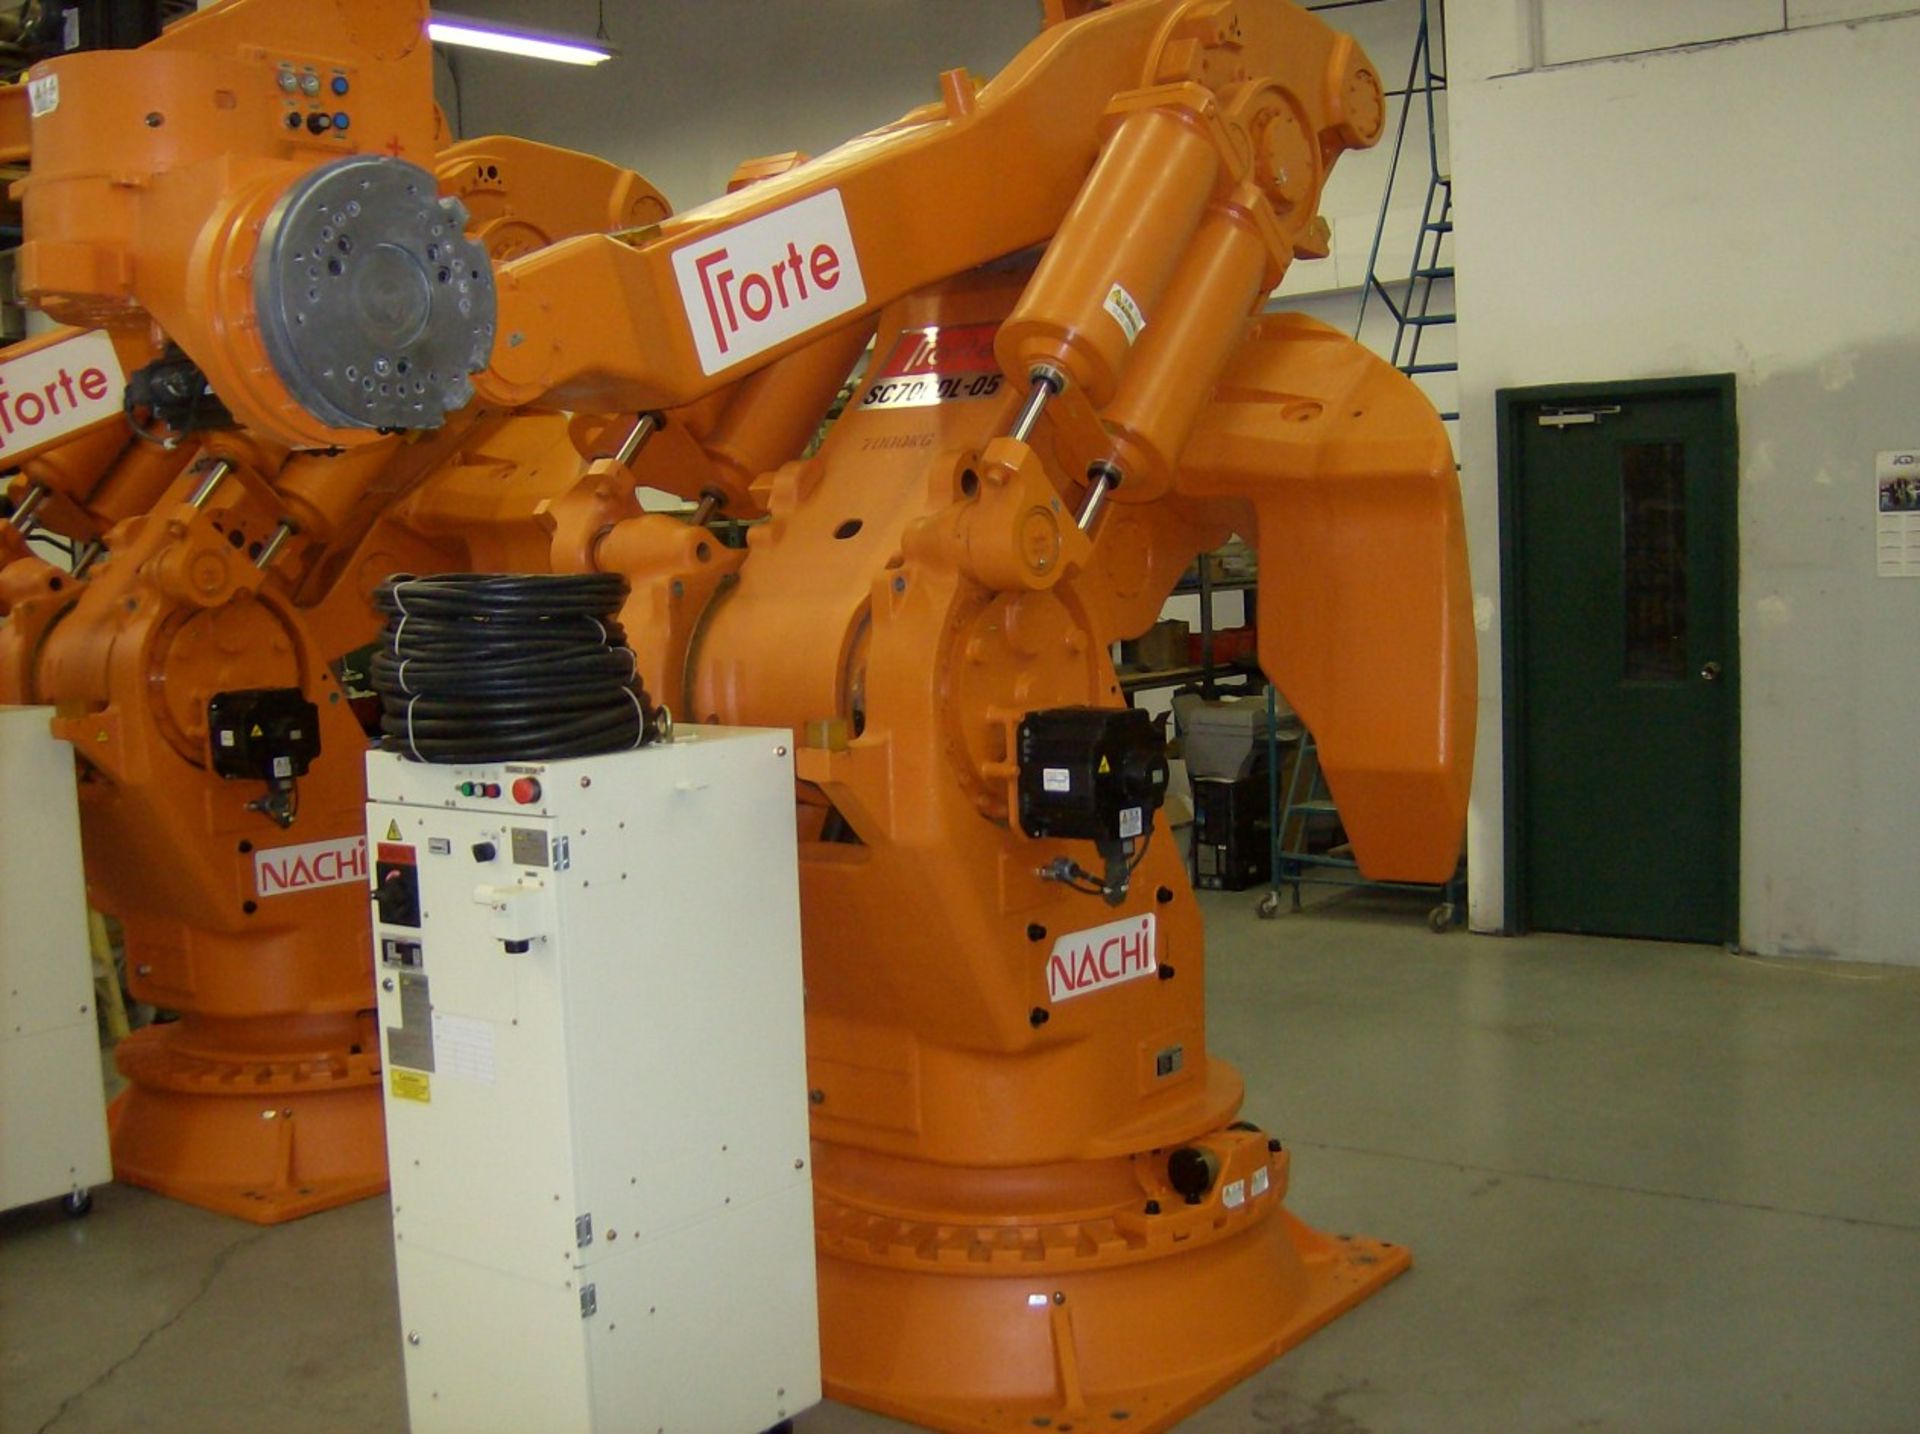 NACHI SC700DL-05-AX20-1101, 6 AXIS, YEAR 2006, SN 50309, LOCATION ONTARIO CA (NEW NEVER USED)